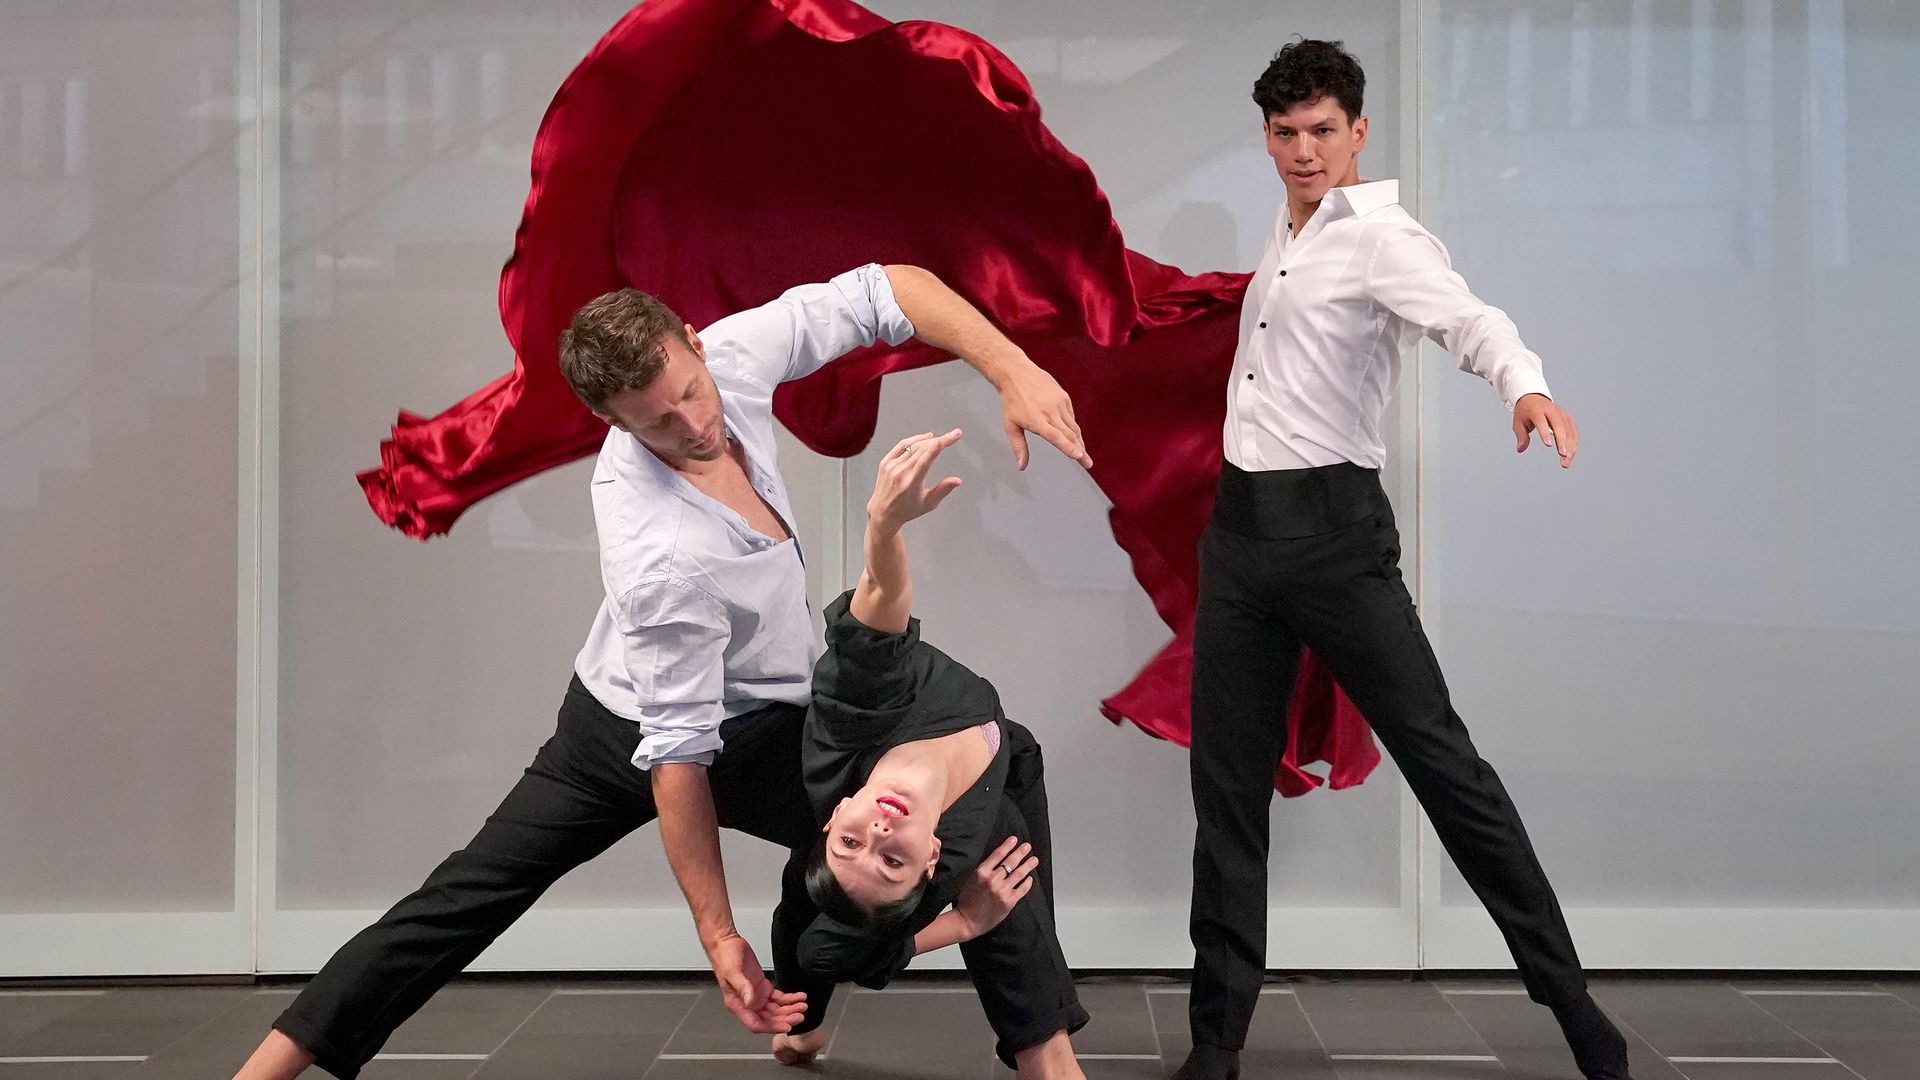 two men and a woman dance ballet while a large red silk cloth drapes behind them